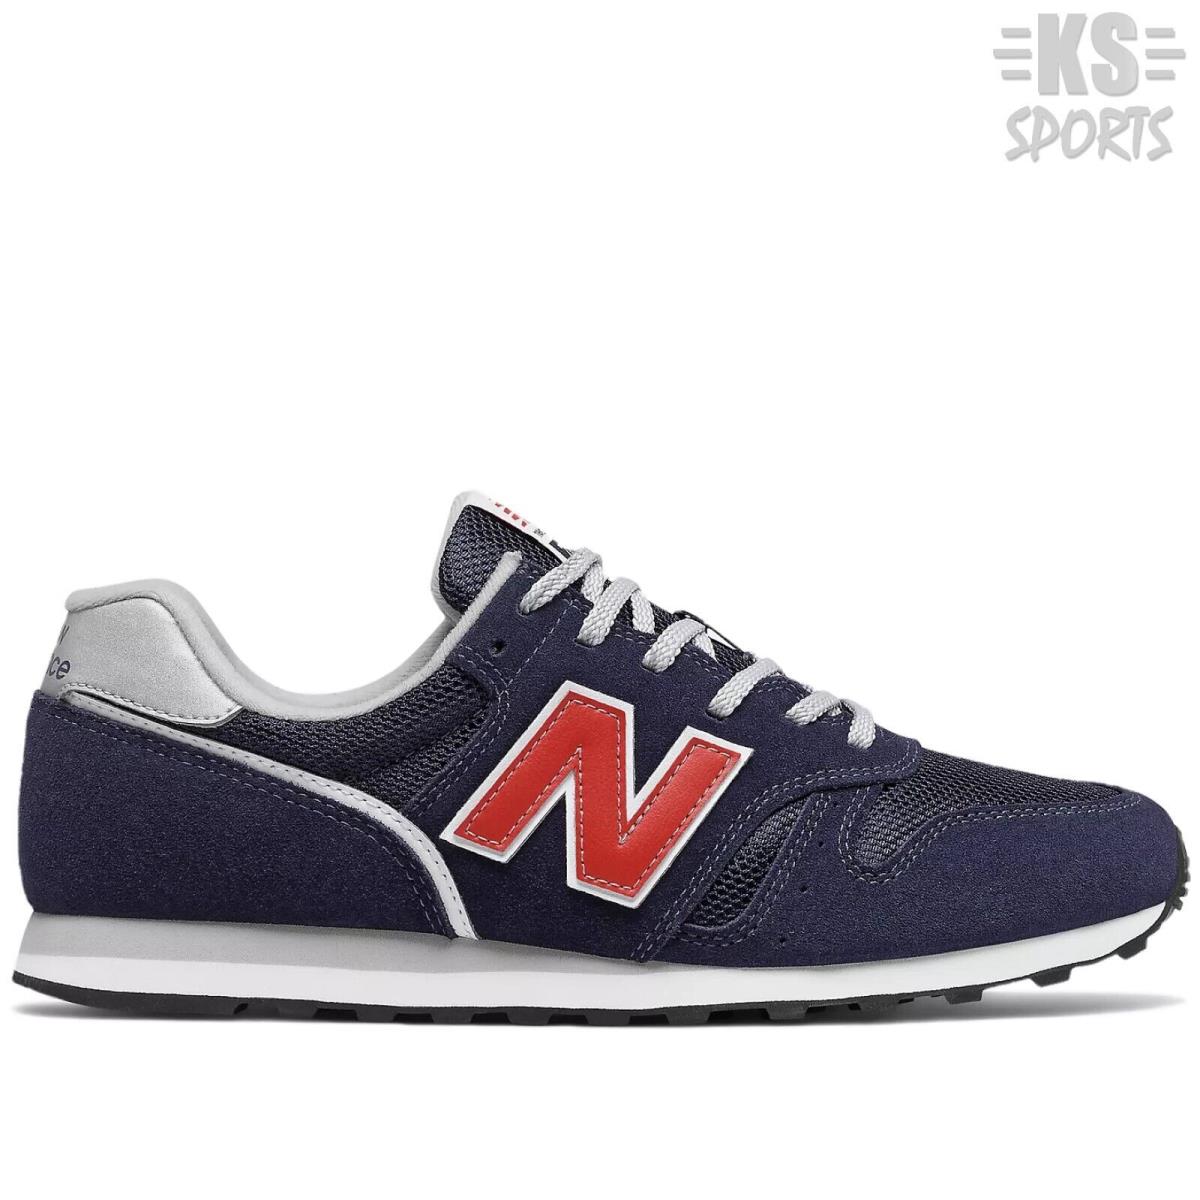 Balance 373v2 `navy Red` Suede Men`s Lifestyle/running Shoes ML373CS2